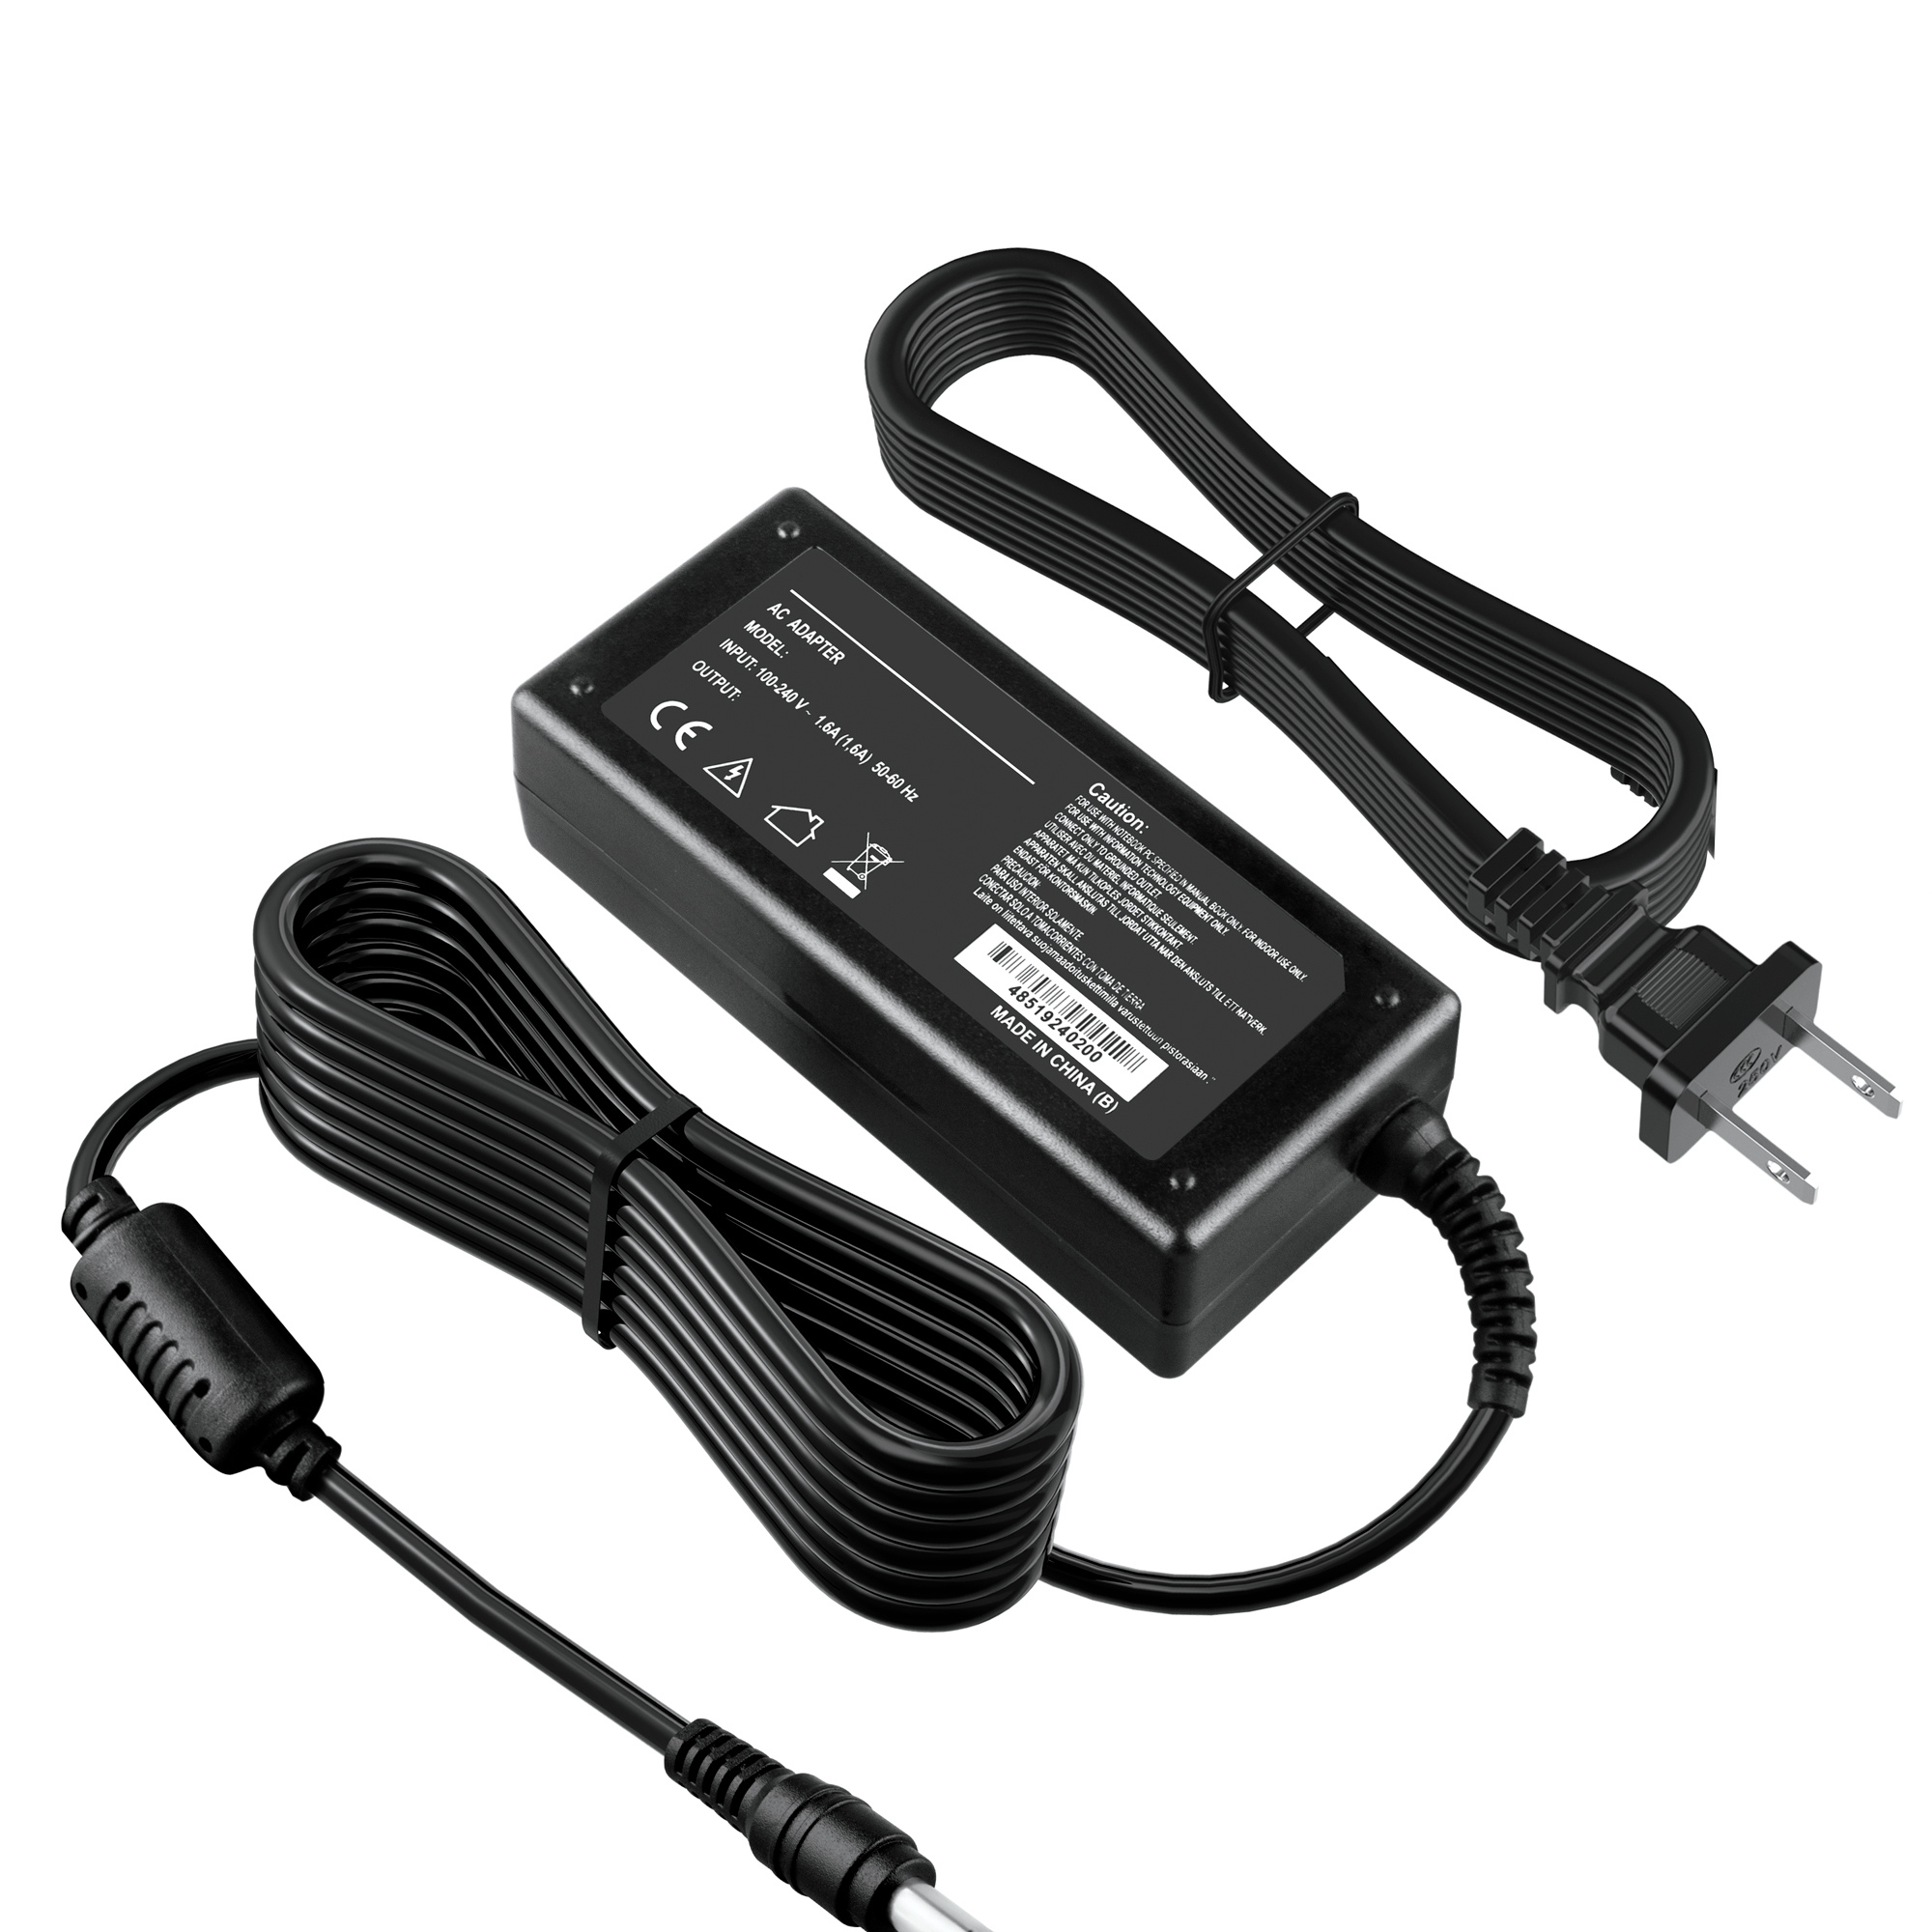 PKPOWER AC DC Adapter Replacement for LG SL6Y 3.1 Channel High-Resolution Sound Bar SoundBar Power - image 1 of 5